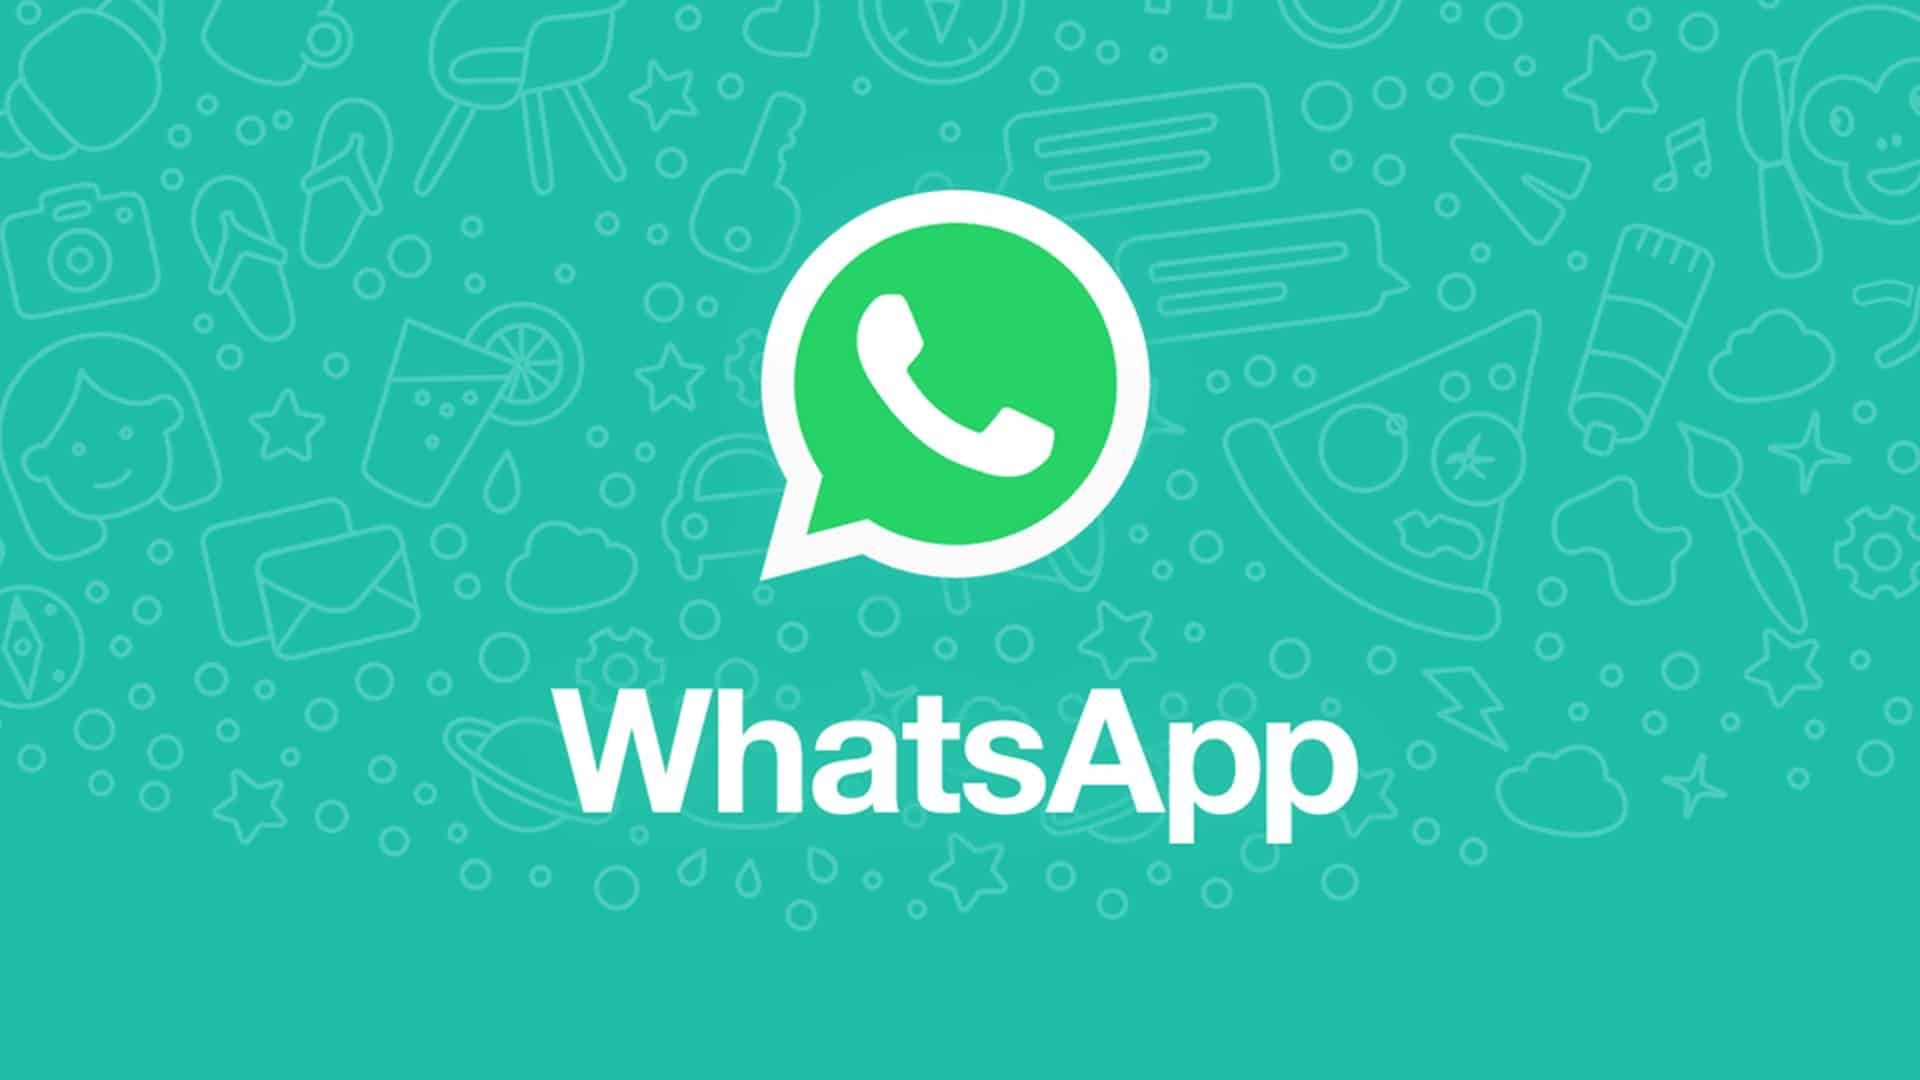 WhatsApp may introduce two-step verification for desktop users